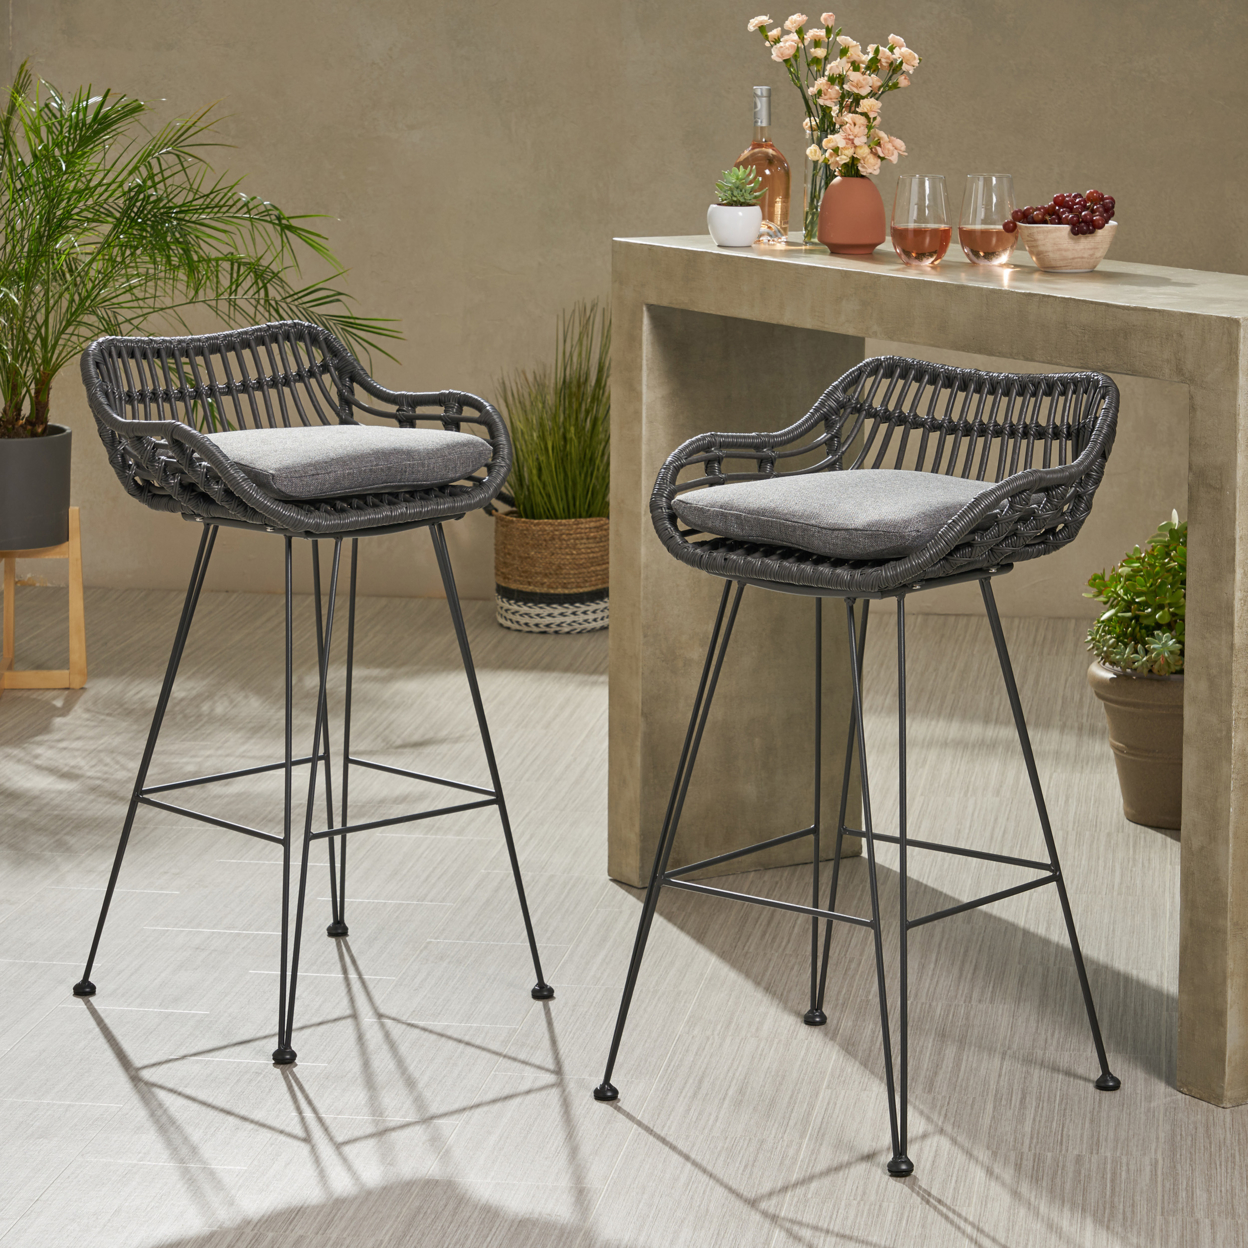 Lisa Outdoor Wicker Barstools With Cushions (Set Of 2) - Light Brown, Black, Beige